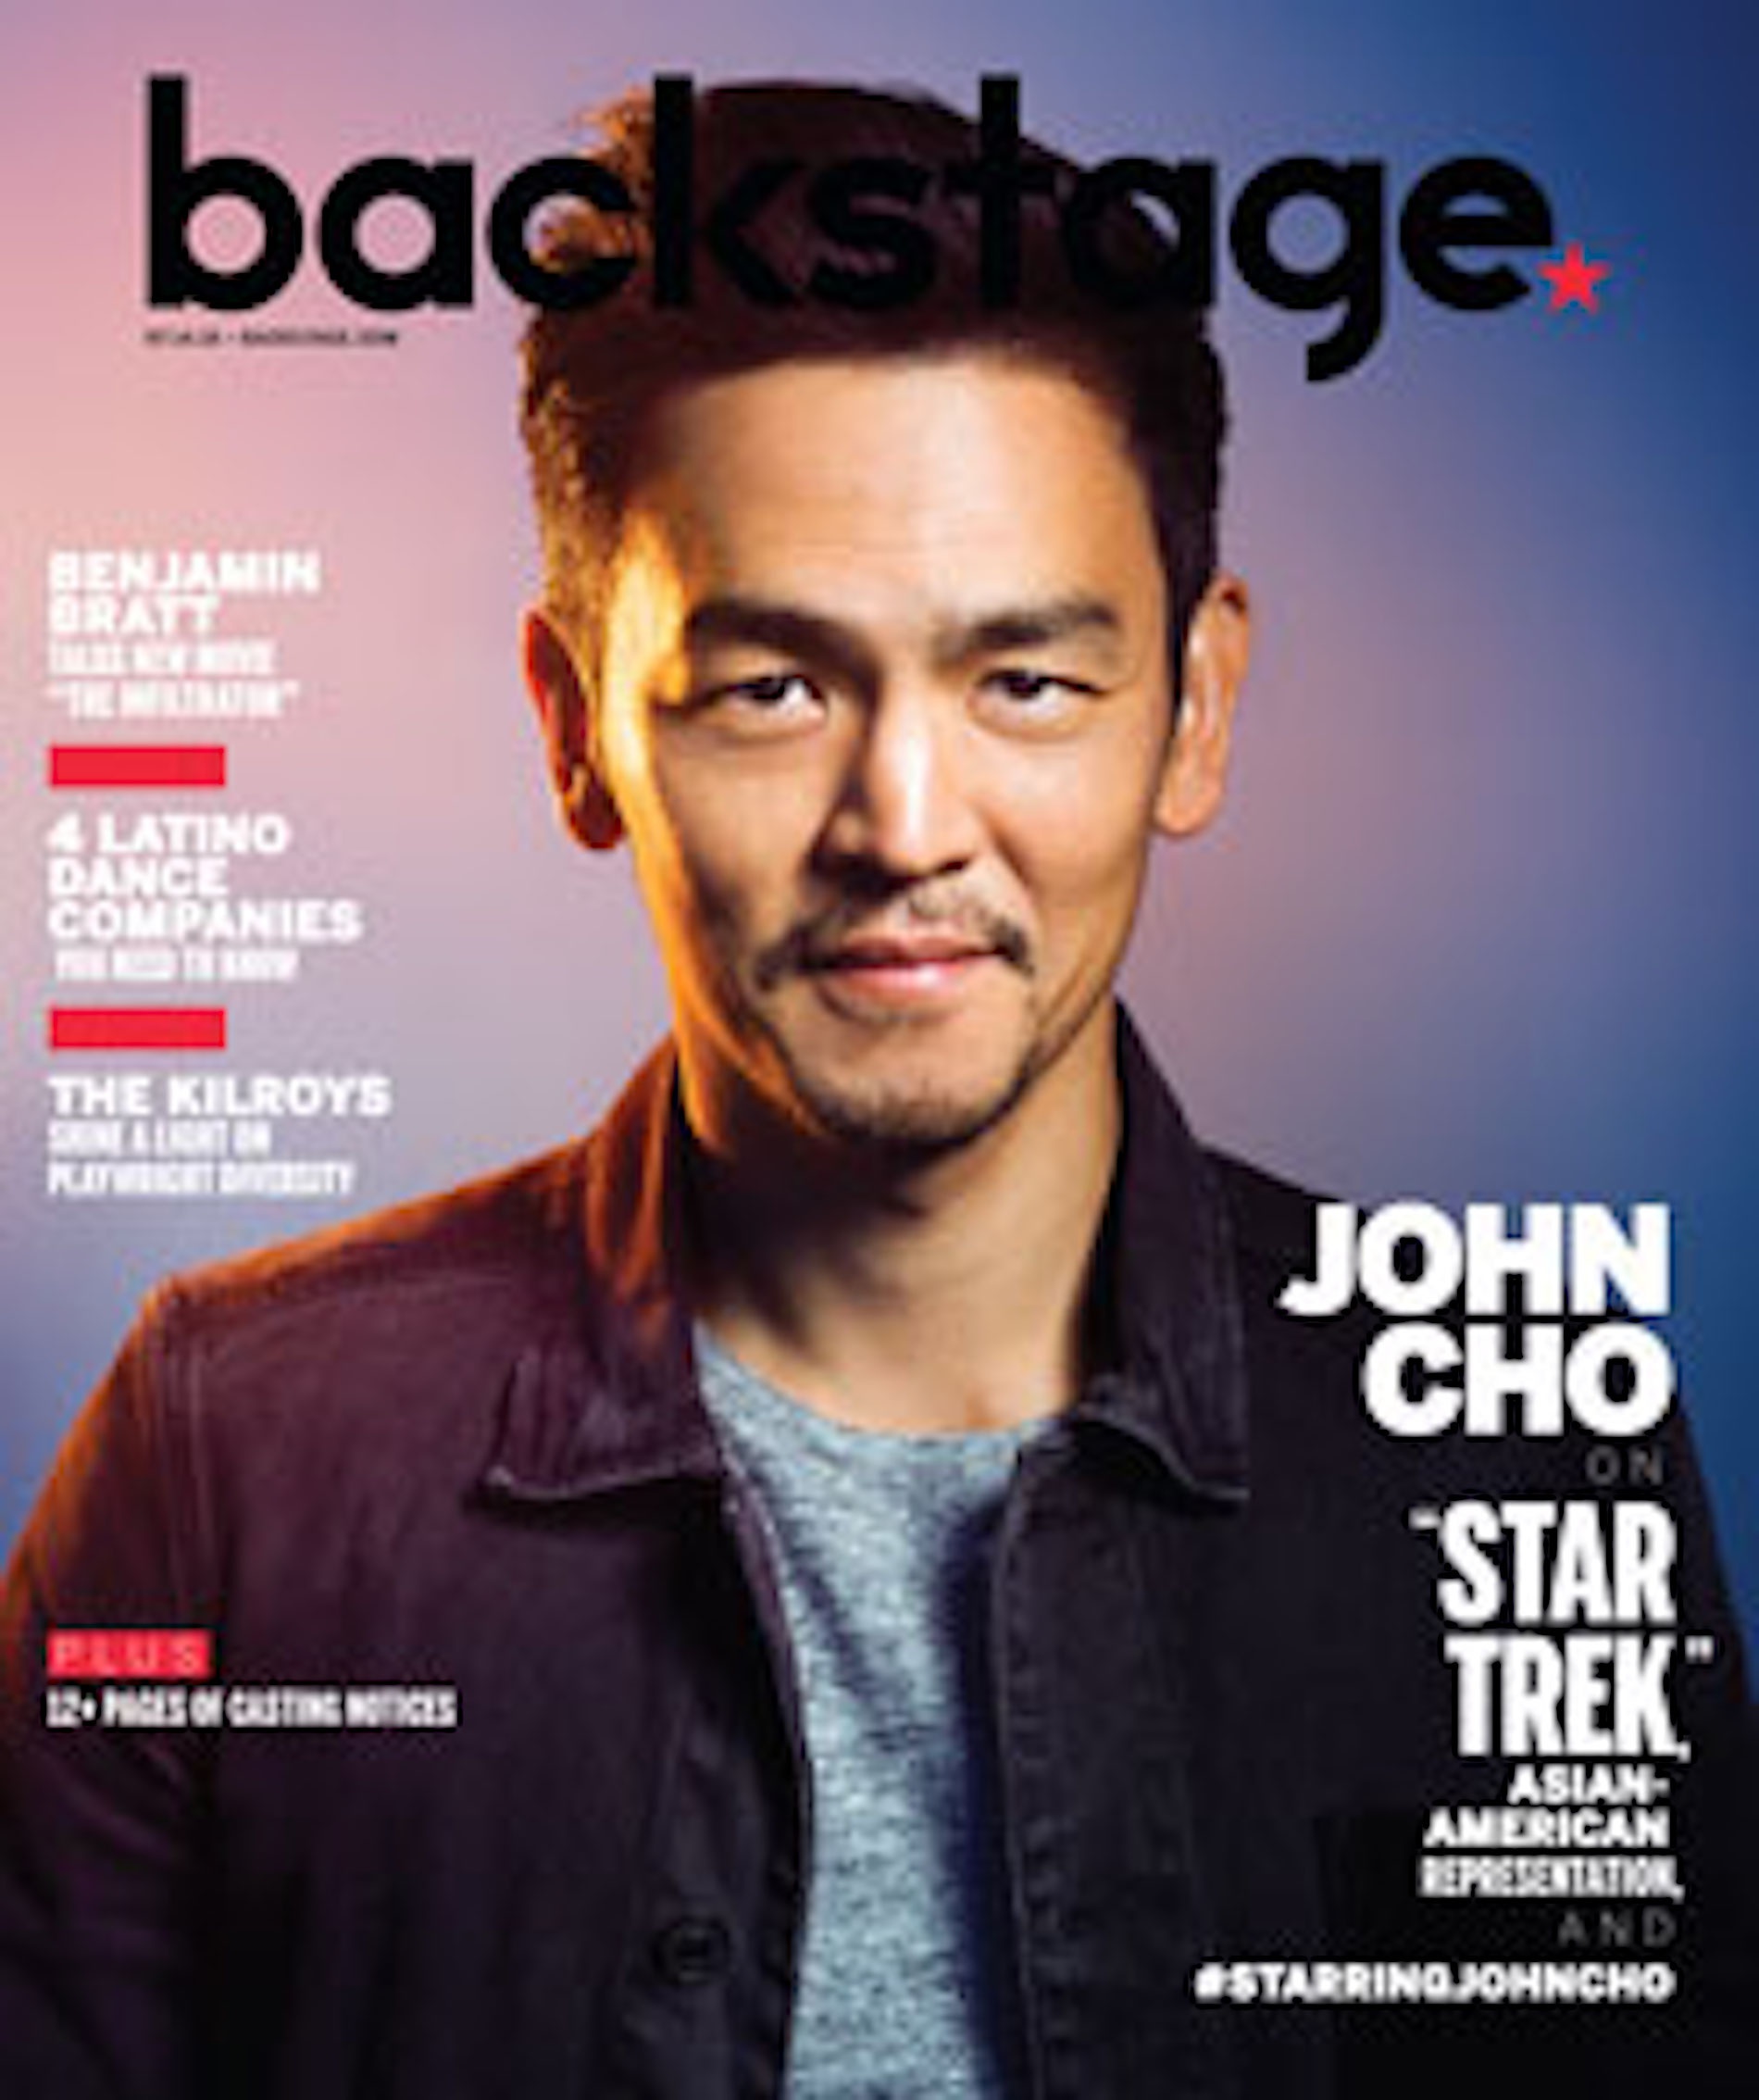 How ‘Star Trek’ and John Cho Are Moving Visibility Forward